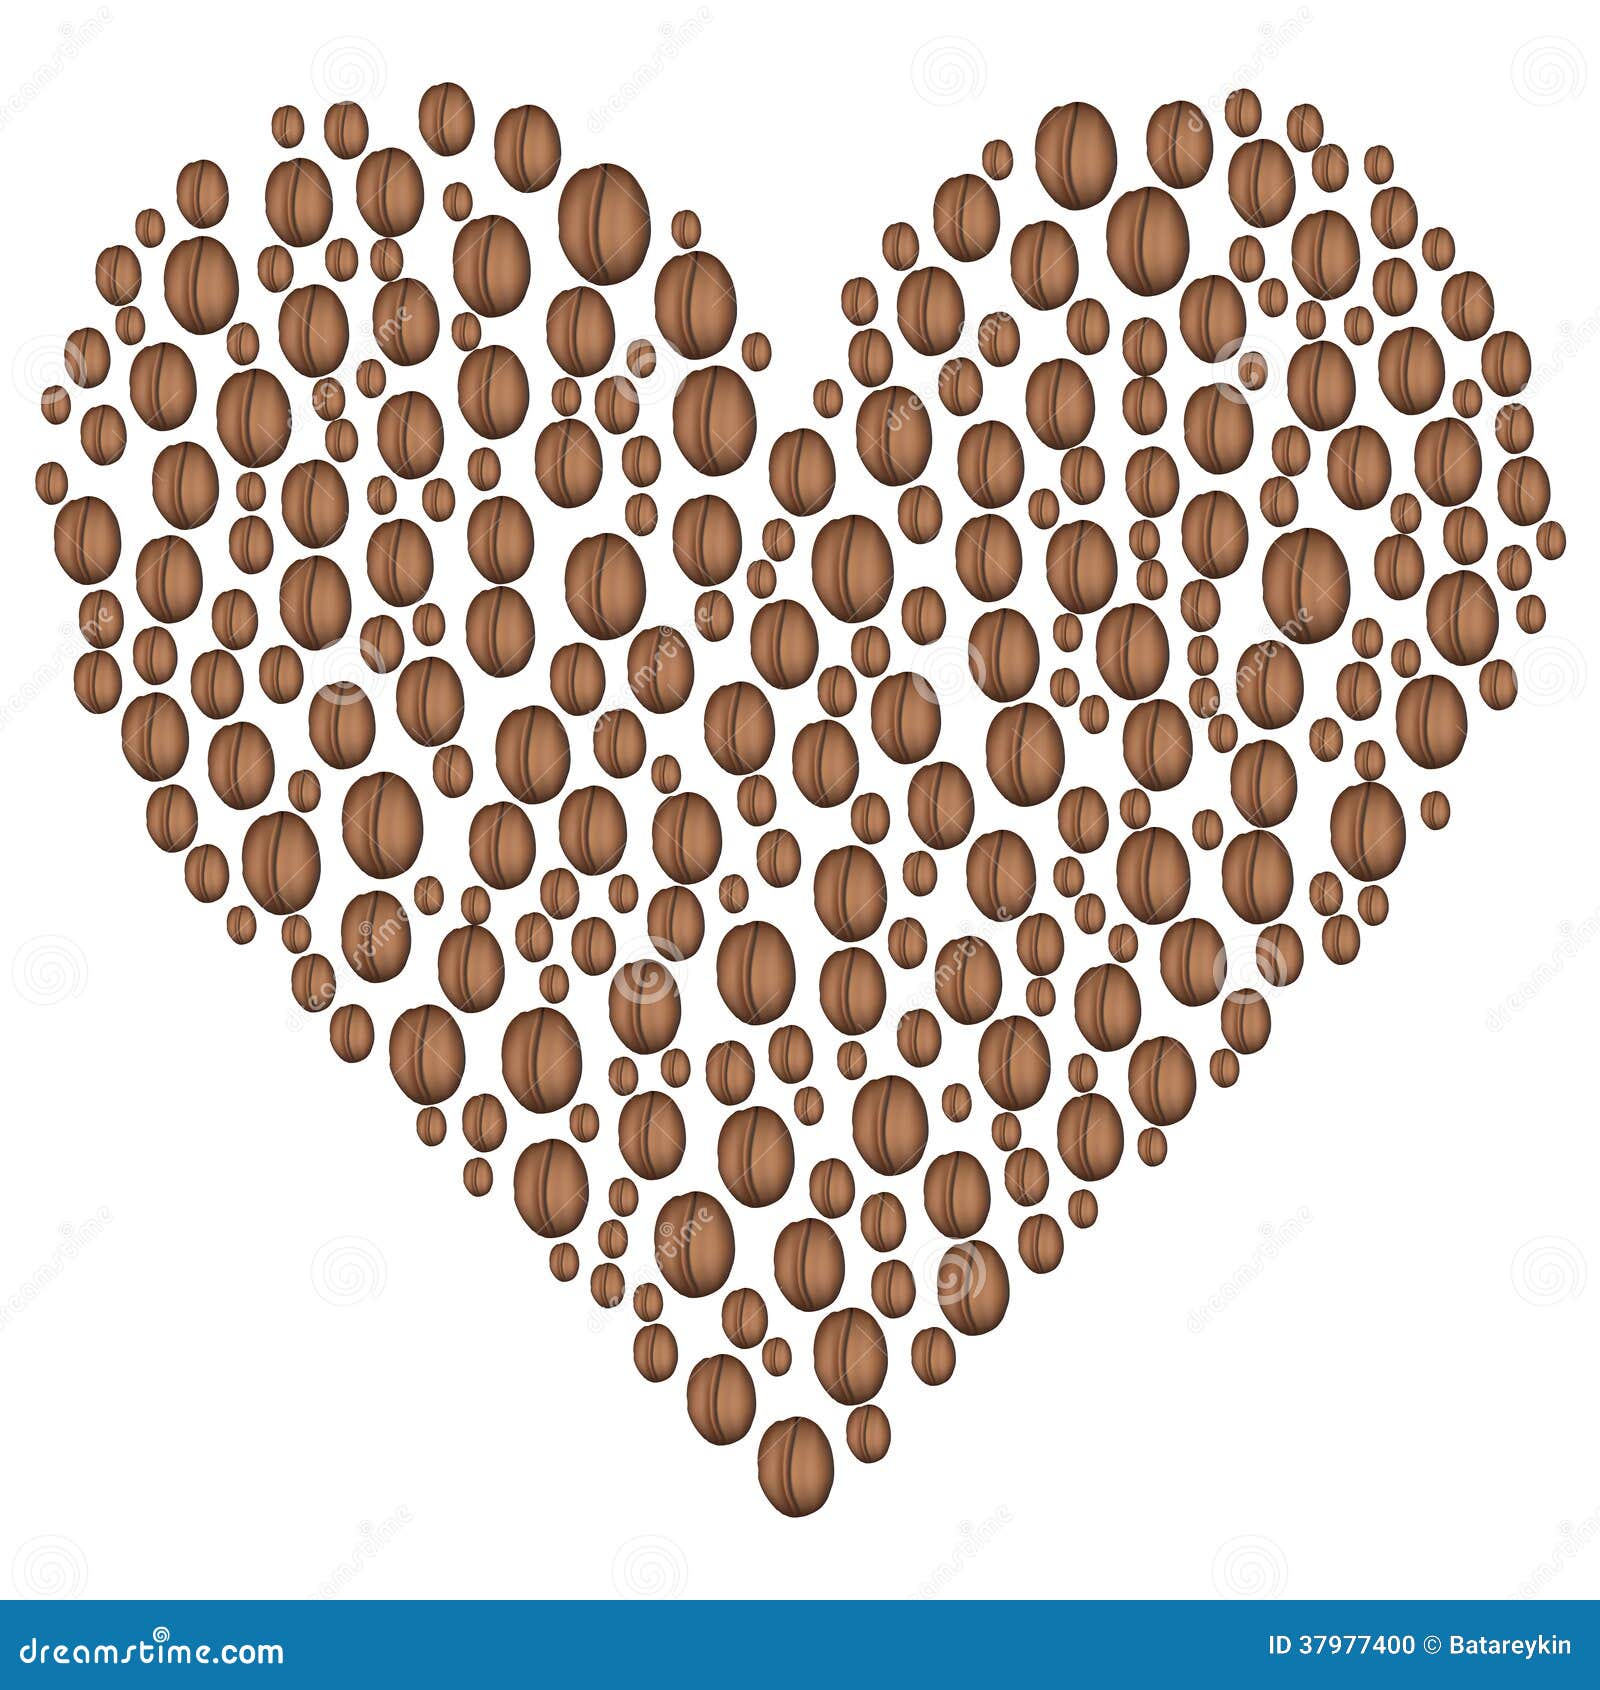 Download Coffee Beans In The Shape Of Heart Stock Vector - Image: 37977400